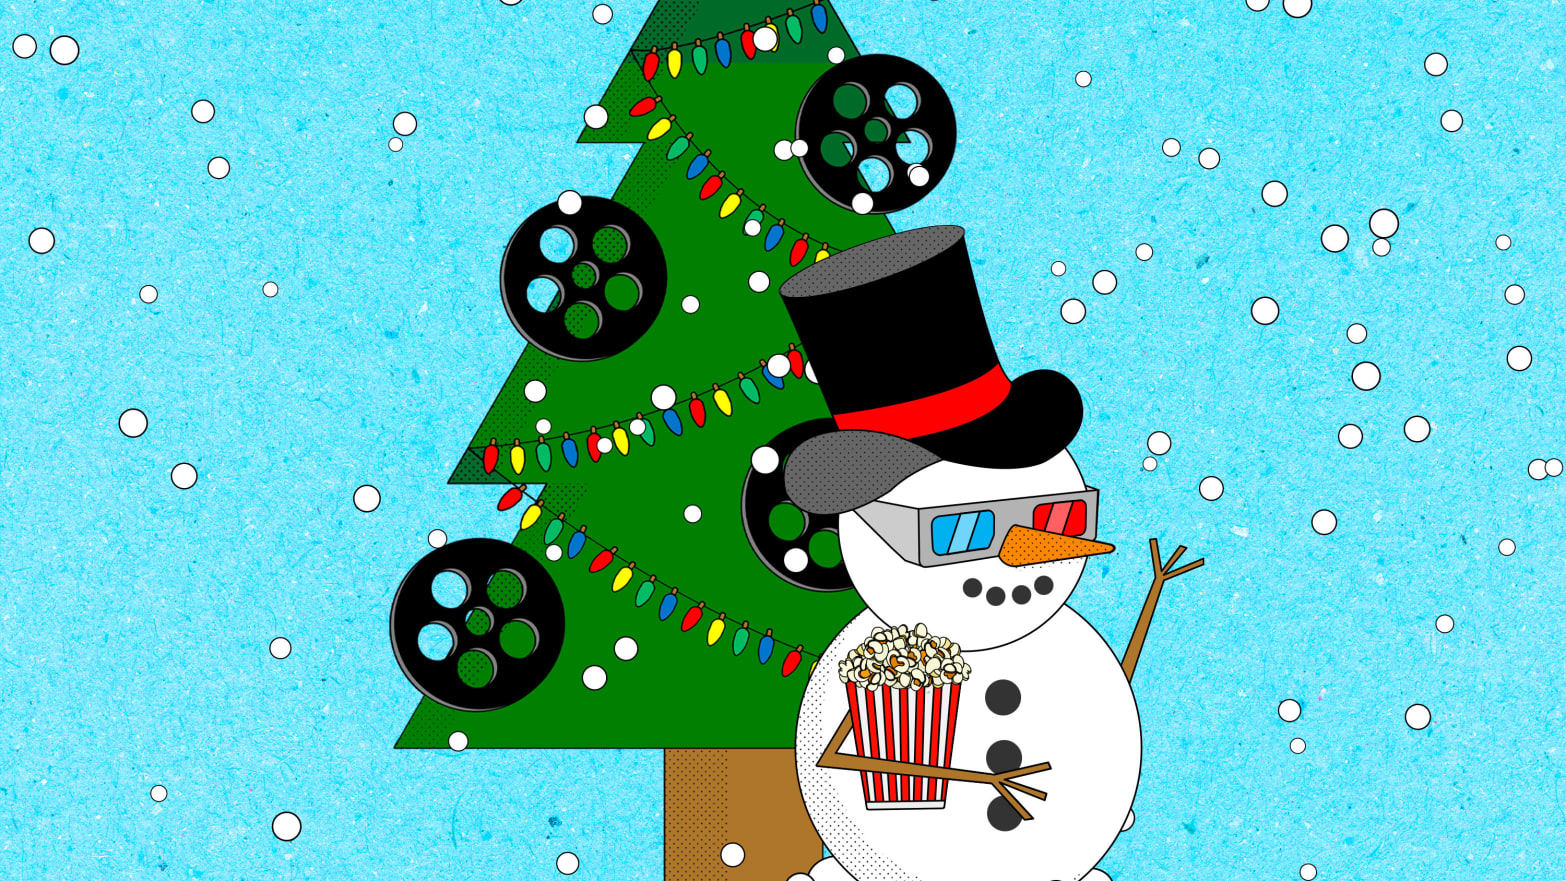 An illustration of a snowman wearing 3D glasses and holding a bucket of popcorn. Behind him is a Christmas tree with film reels decorating it.